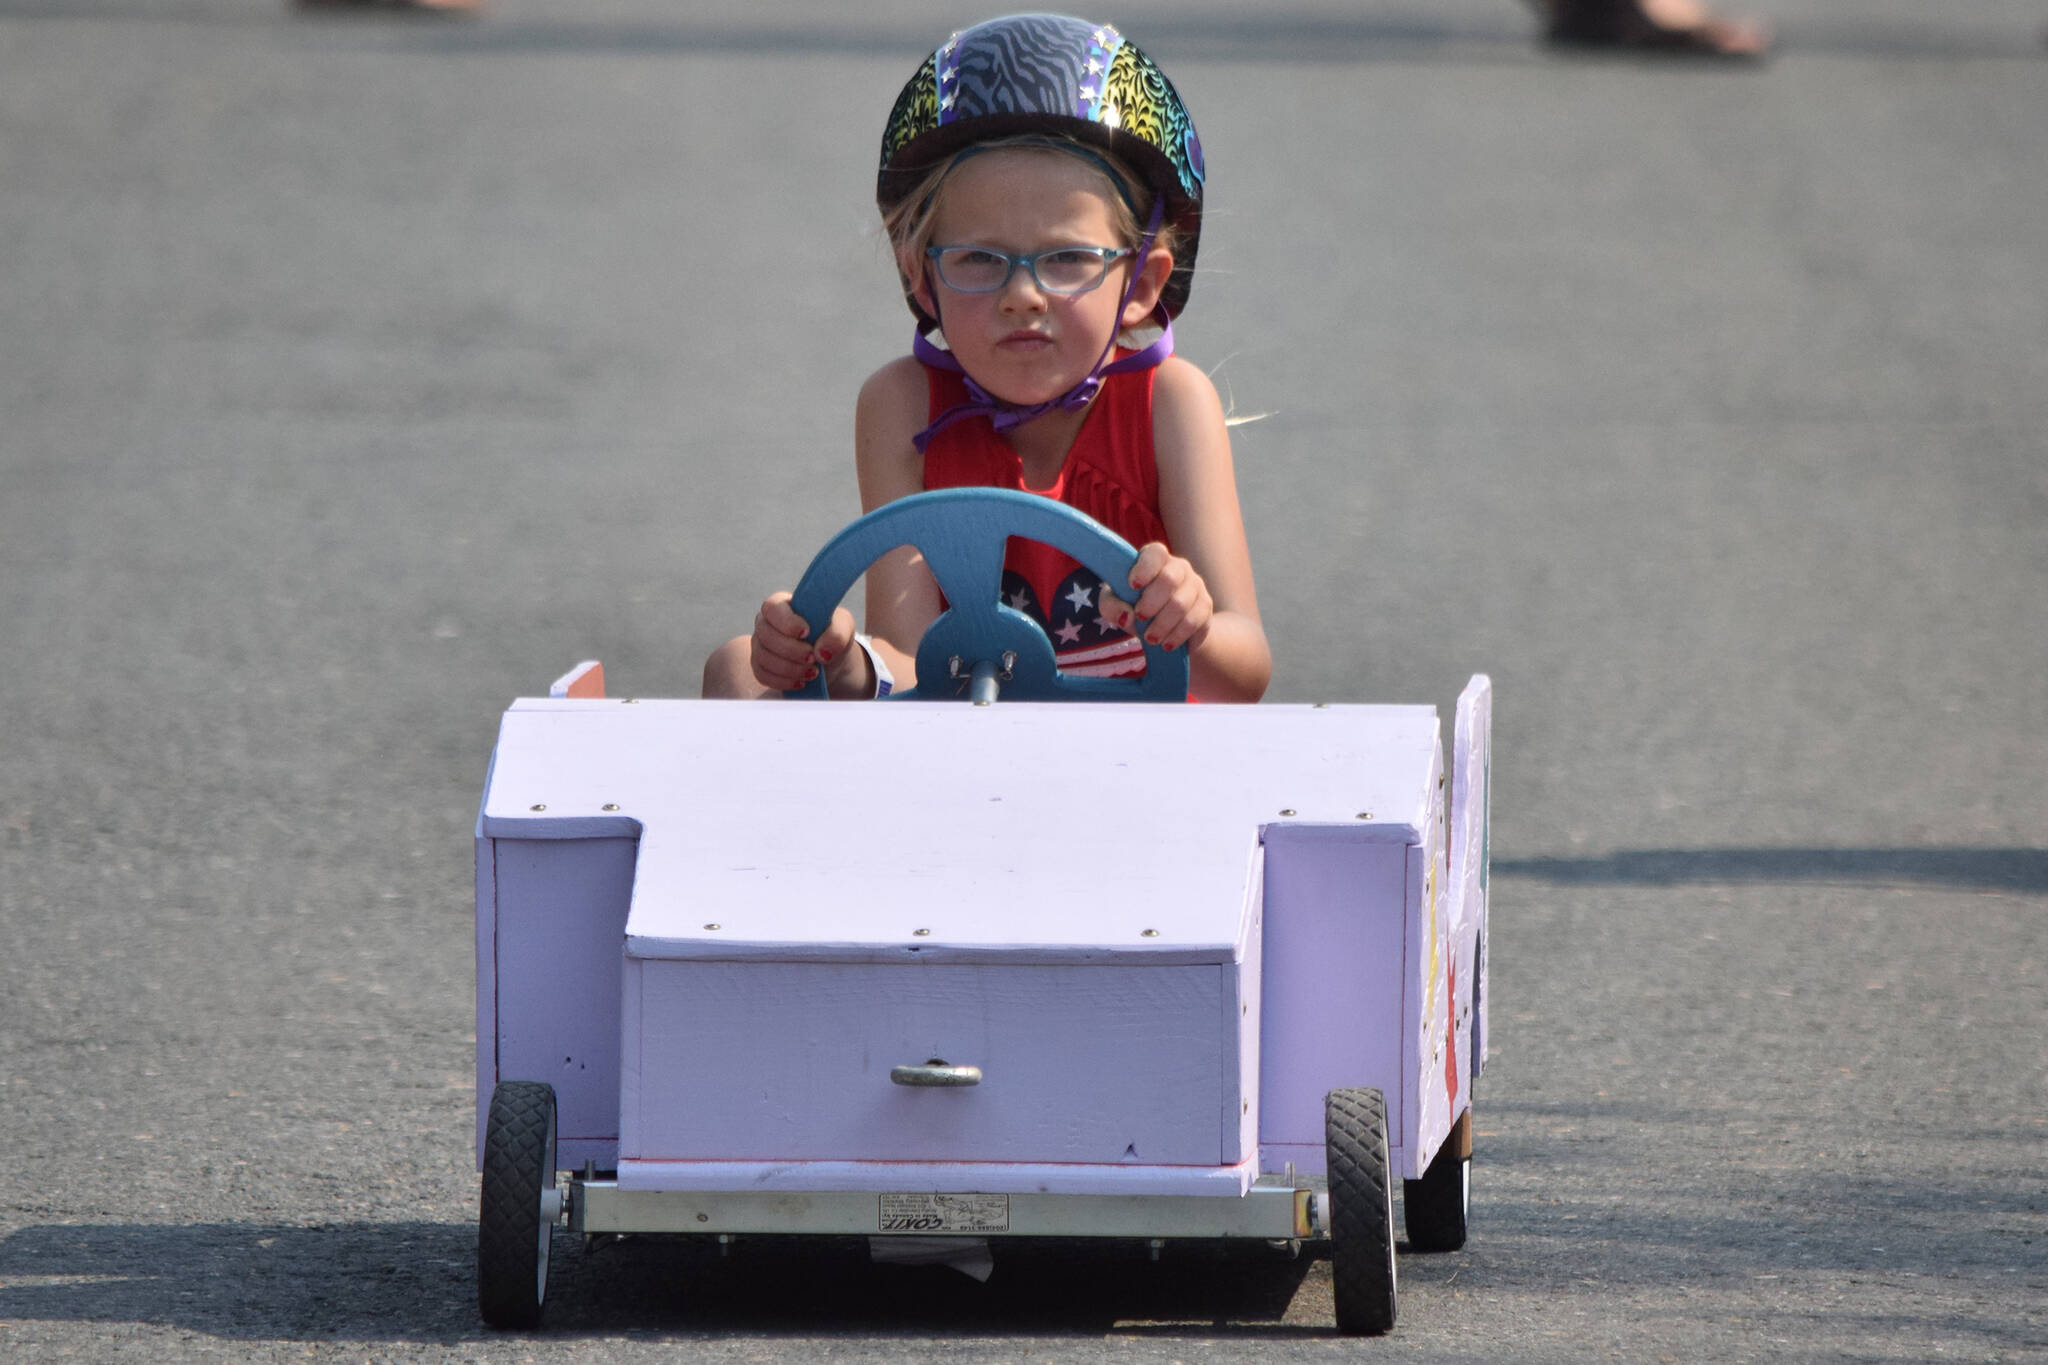 Amelia Farrell, 5, races down St. Ann’s Avenue at the Final Soapbox Challenge during the Douglas Fourth of July festivities on Thursday, July 4, 2019. (Nolin Ainsworth | Juneau Empire)